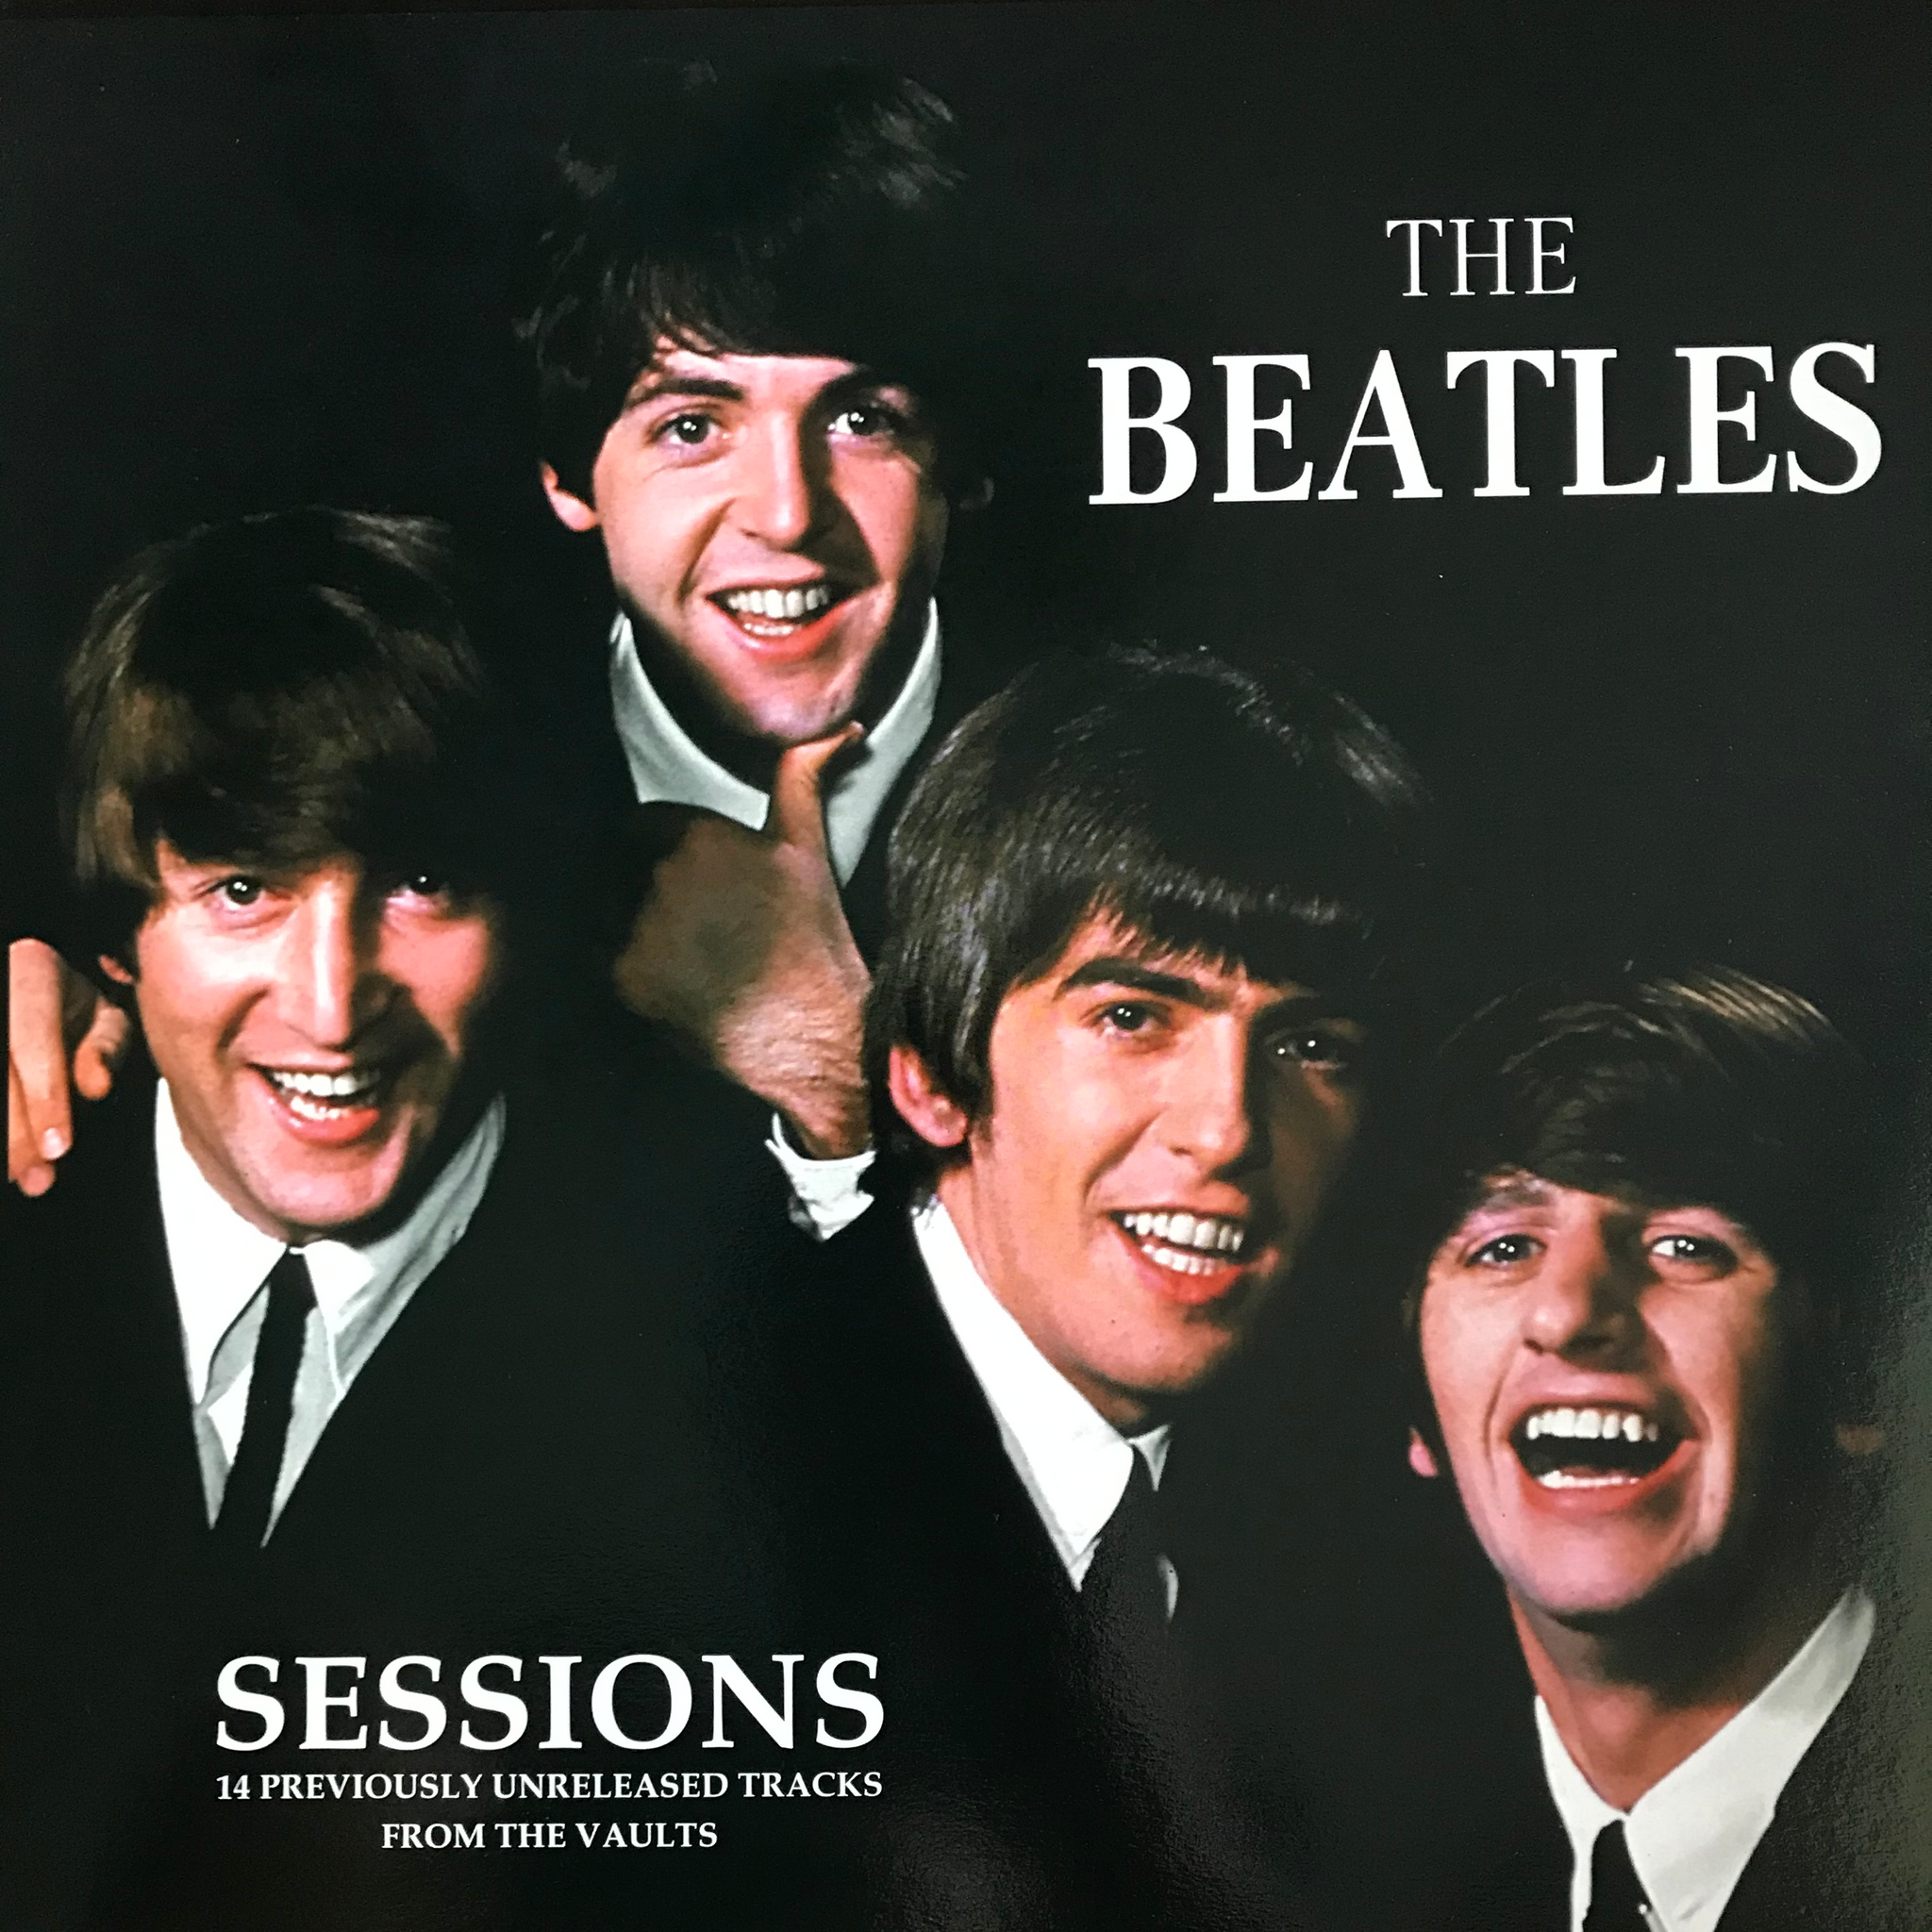 Beatles, The "Sessions" LP